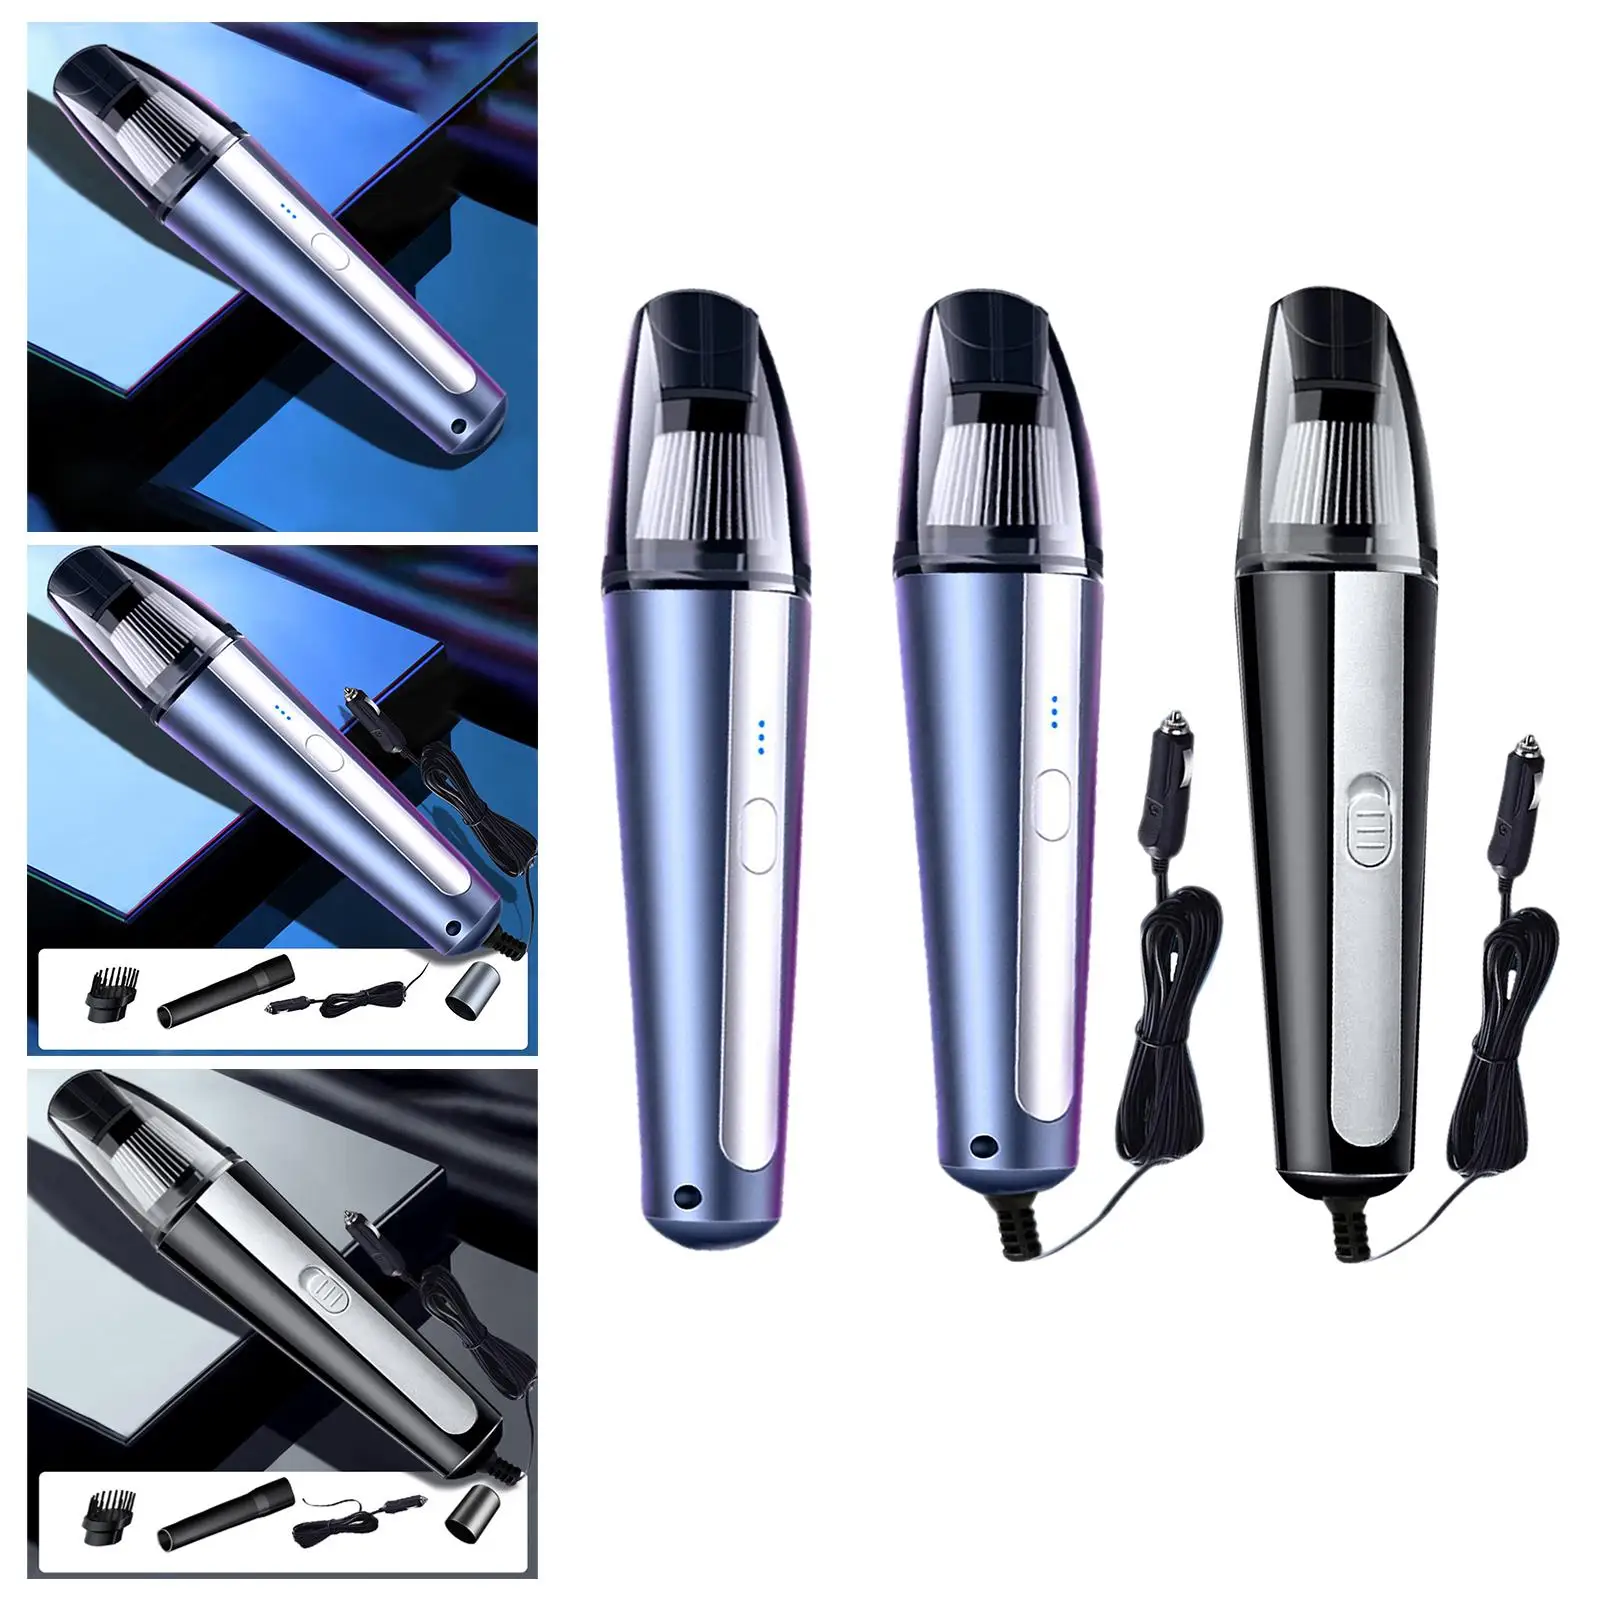 Handheld Cars Vacuum Cleaner 6000PA Dry and Wet Use Removable Powerful Cyclone Suction Fits for Home Office Chairs Vehicle Parts